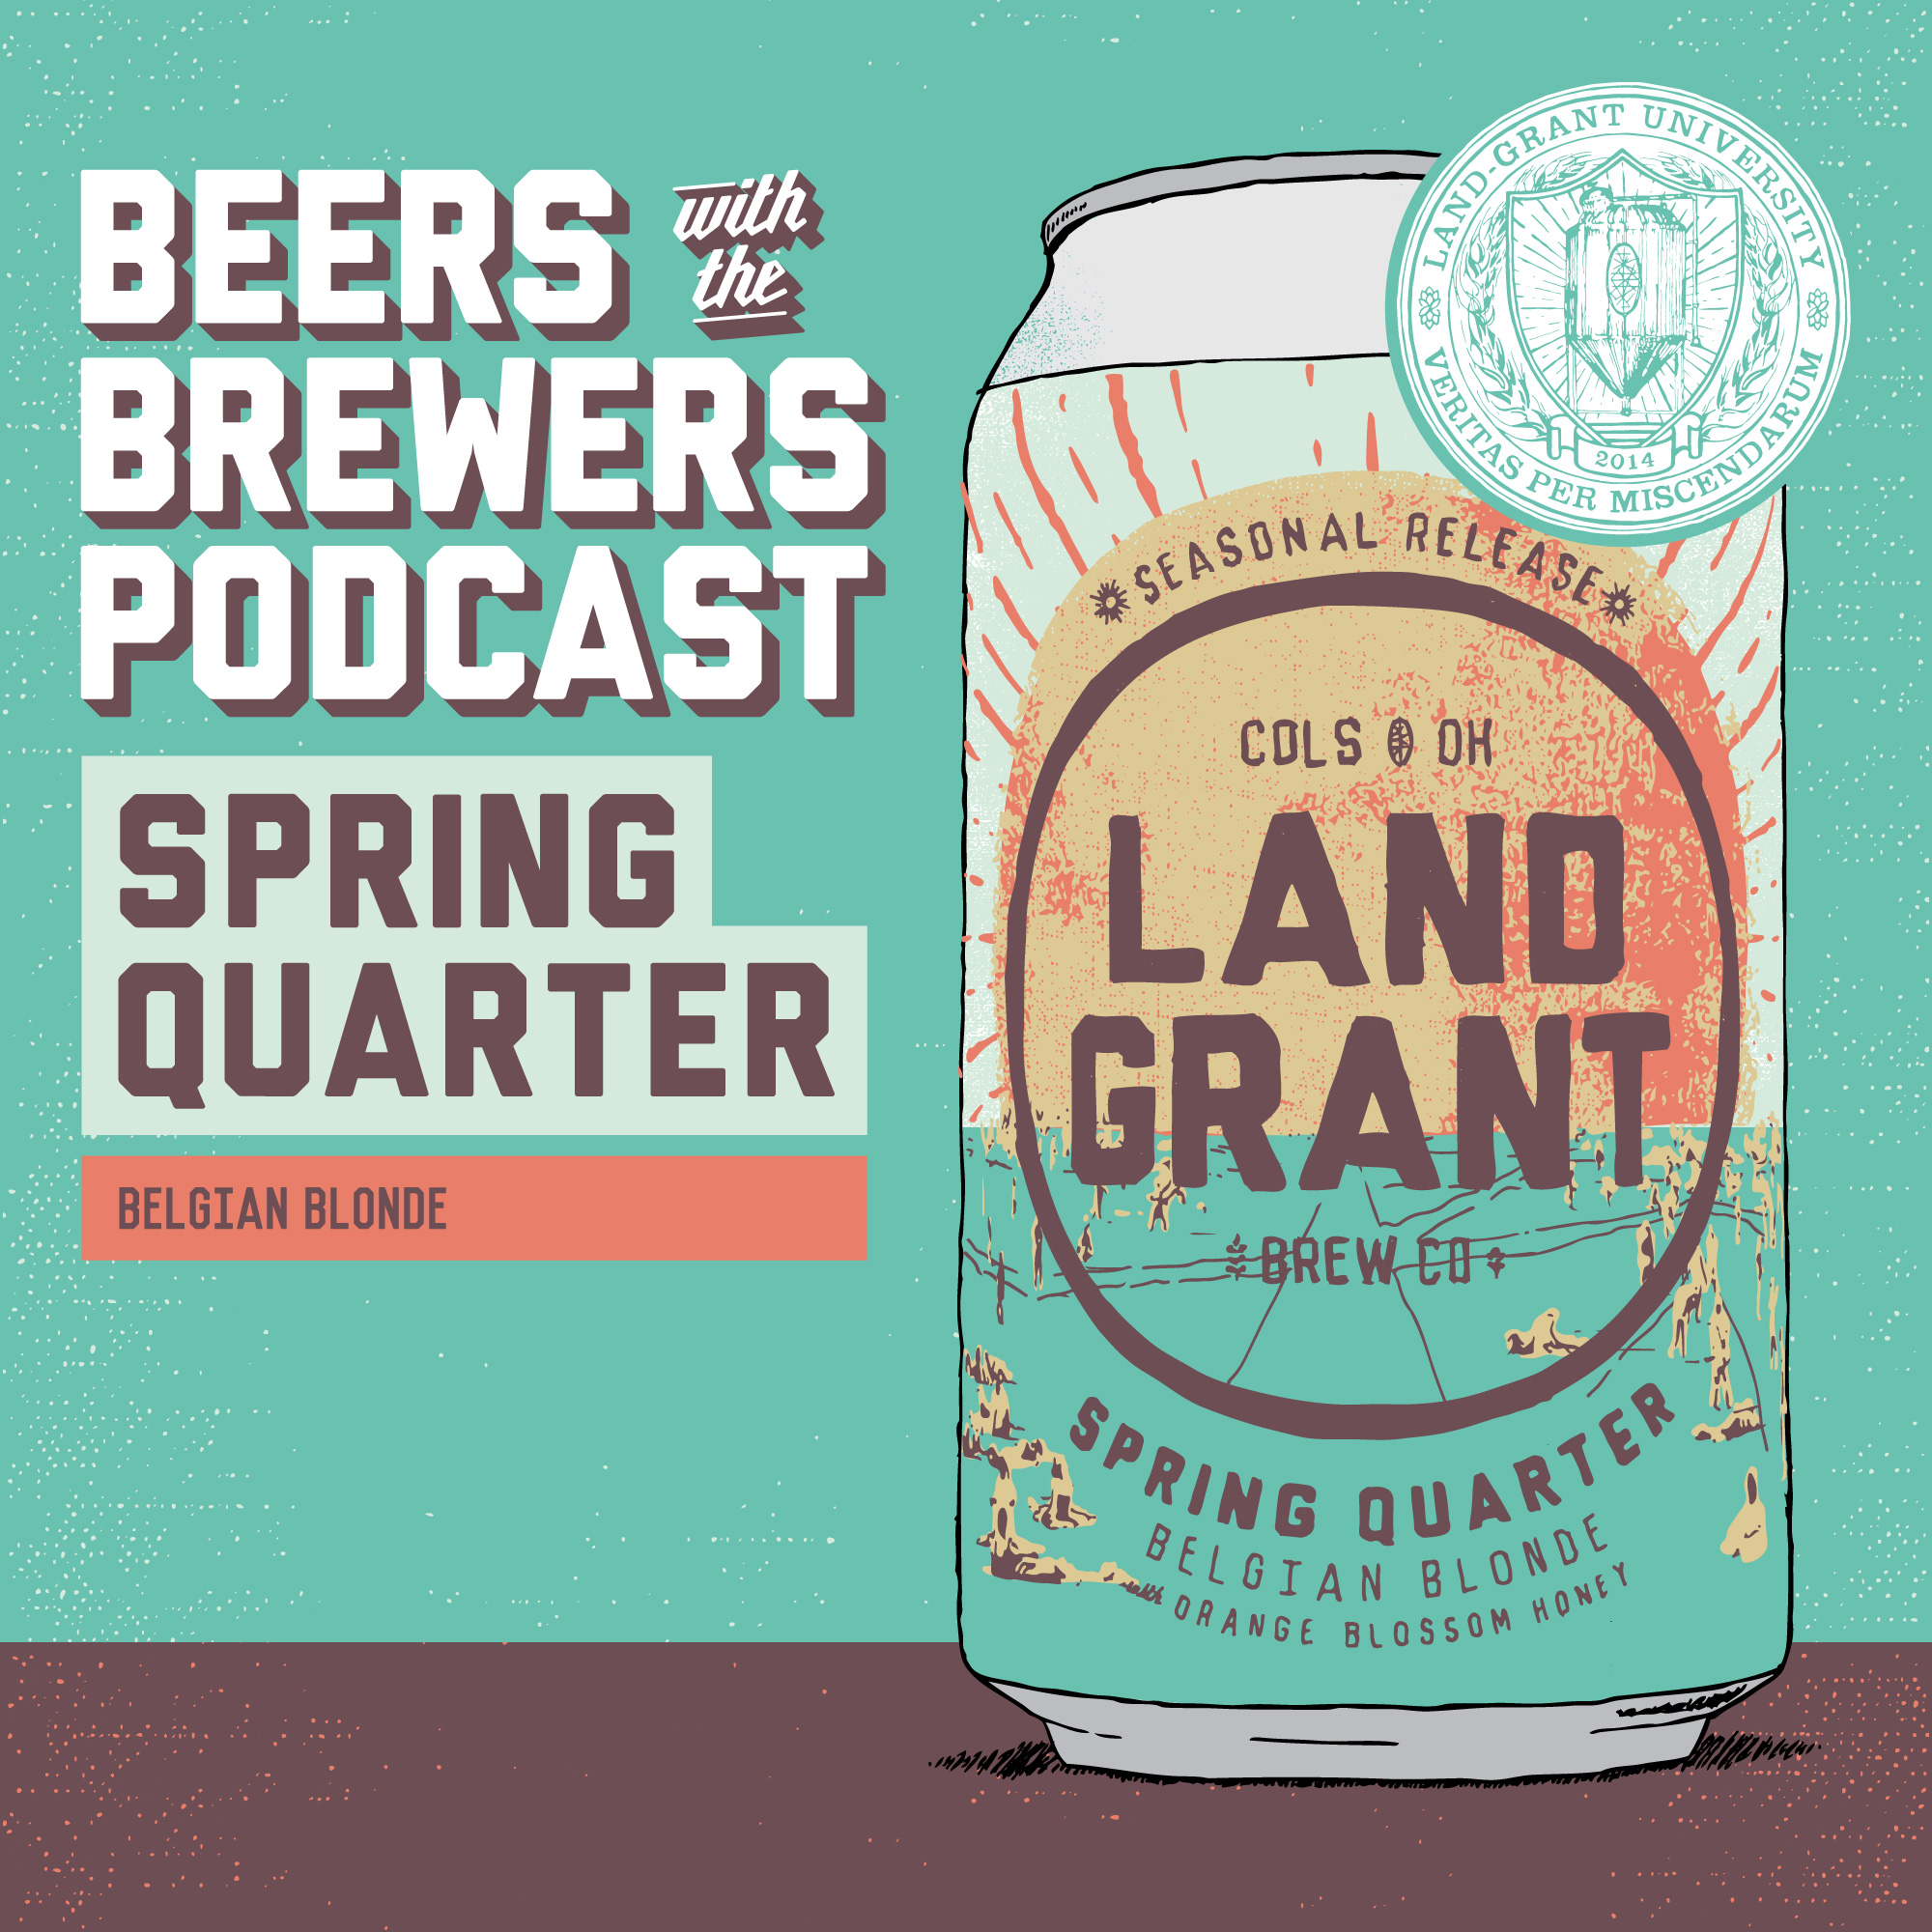 Spring Quarter - Belgian Blonde Ale - Beers with the Brewers